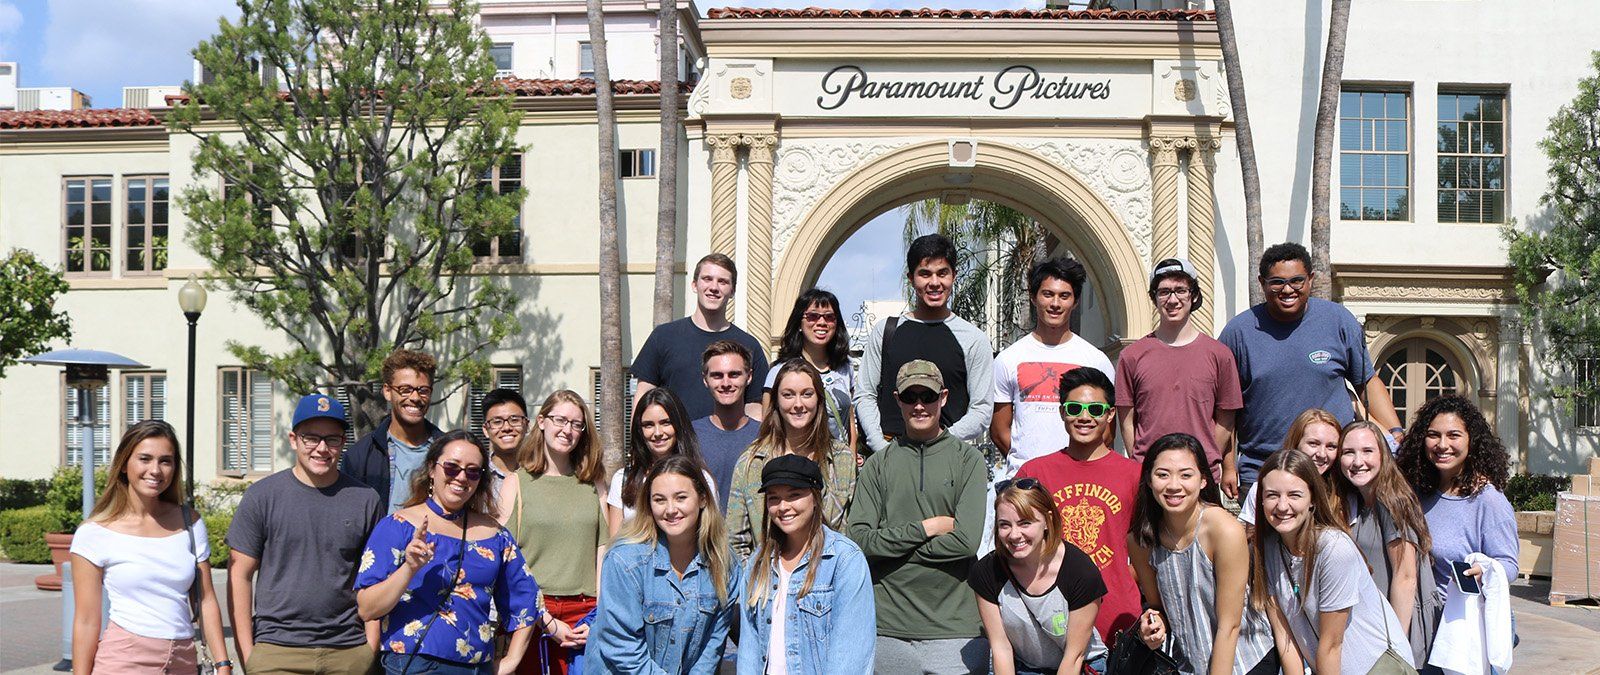 A media communication class poses for a photo in front of Paramount Studios during a class trip.